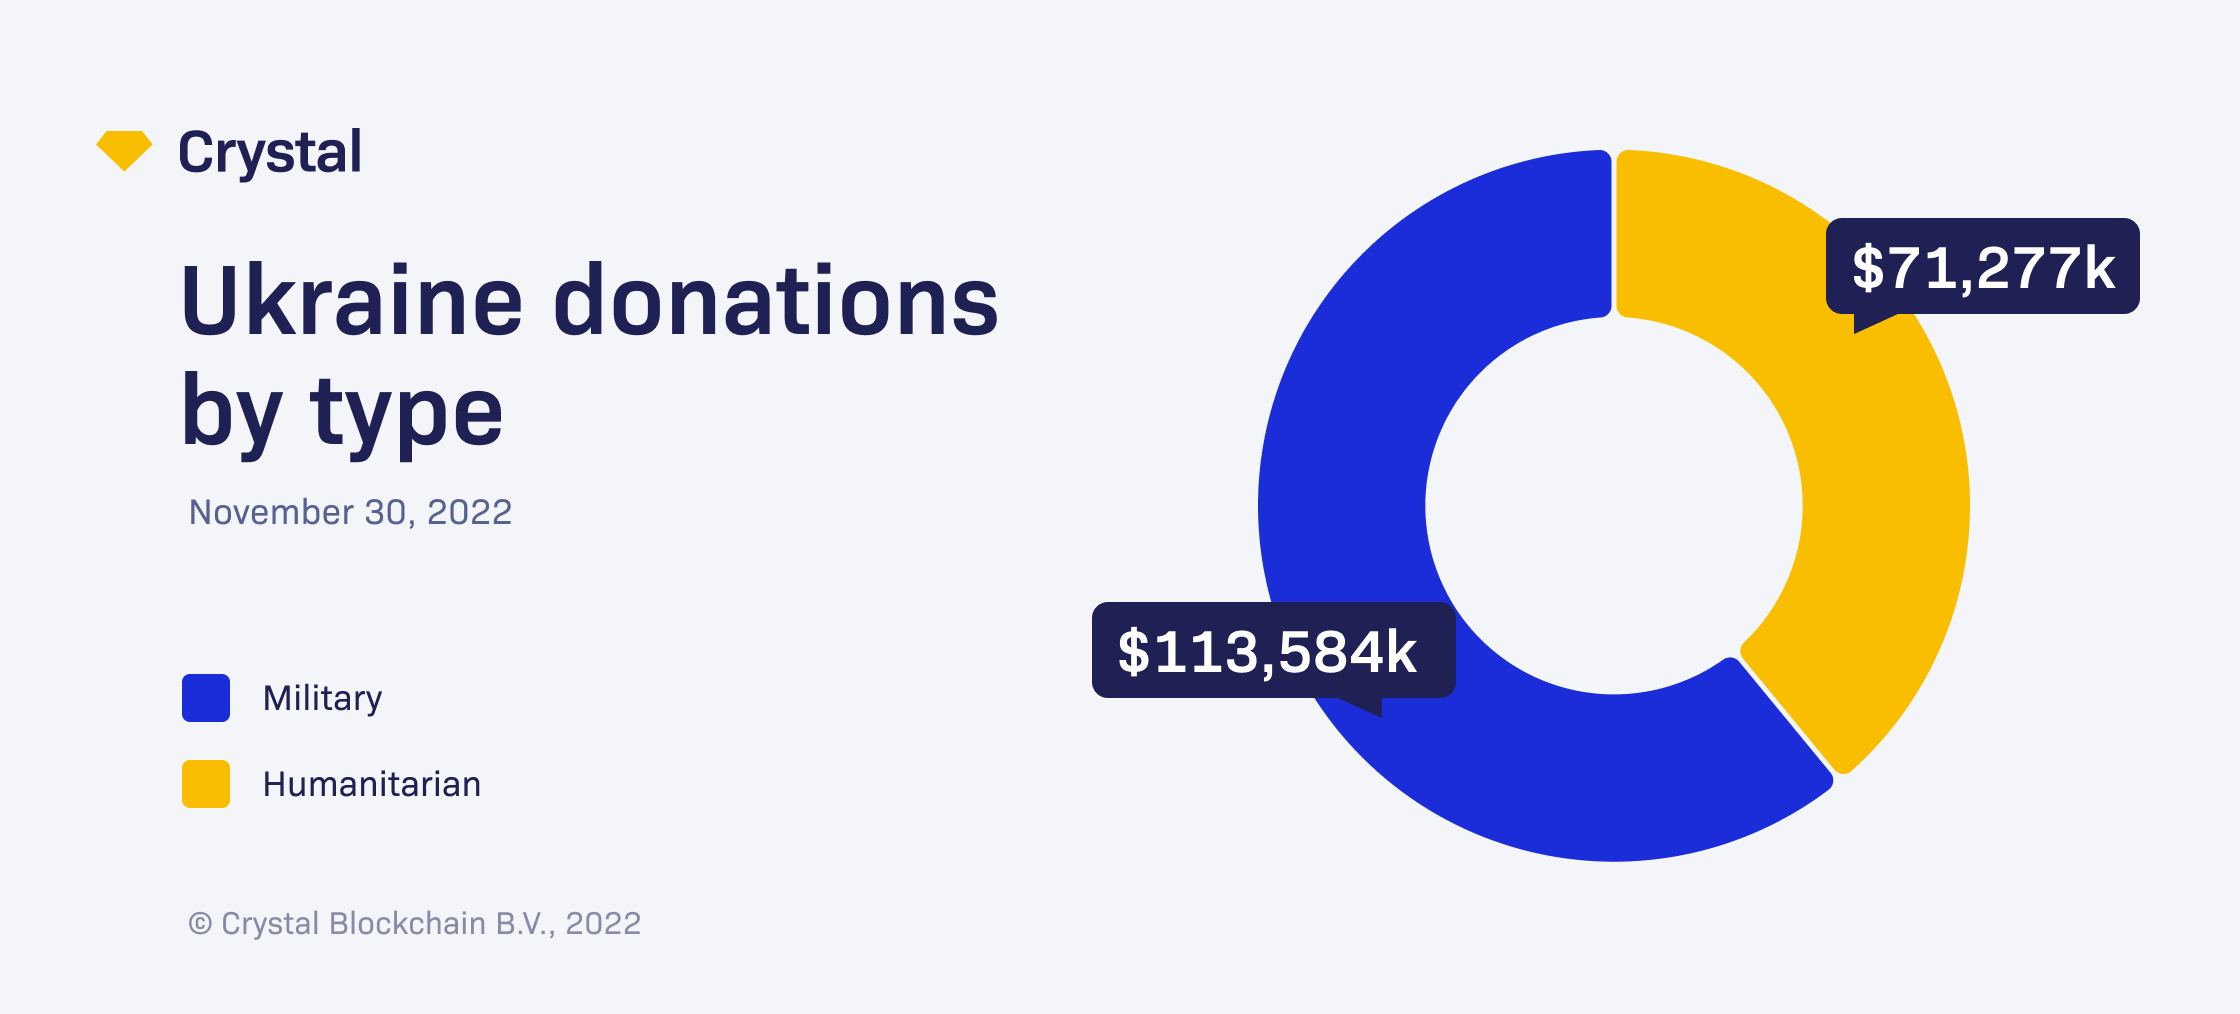 Donations to Ukraine by type - November 30